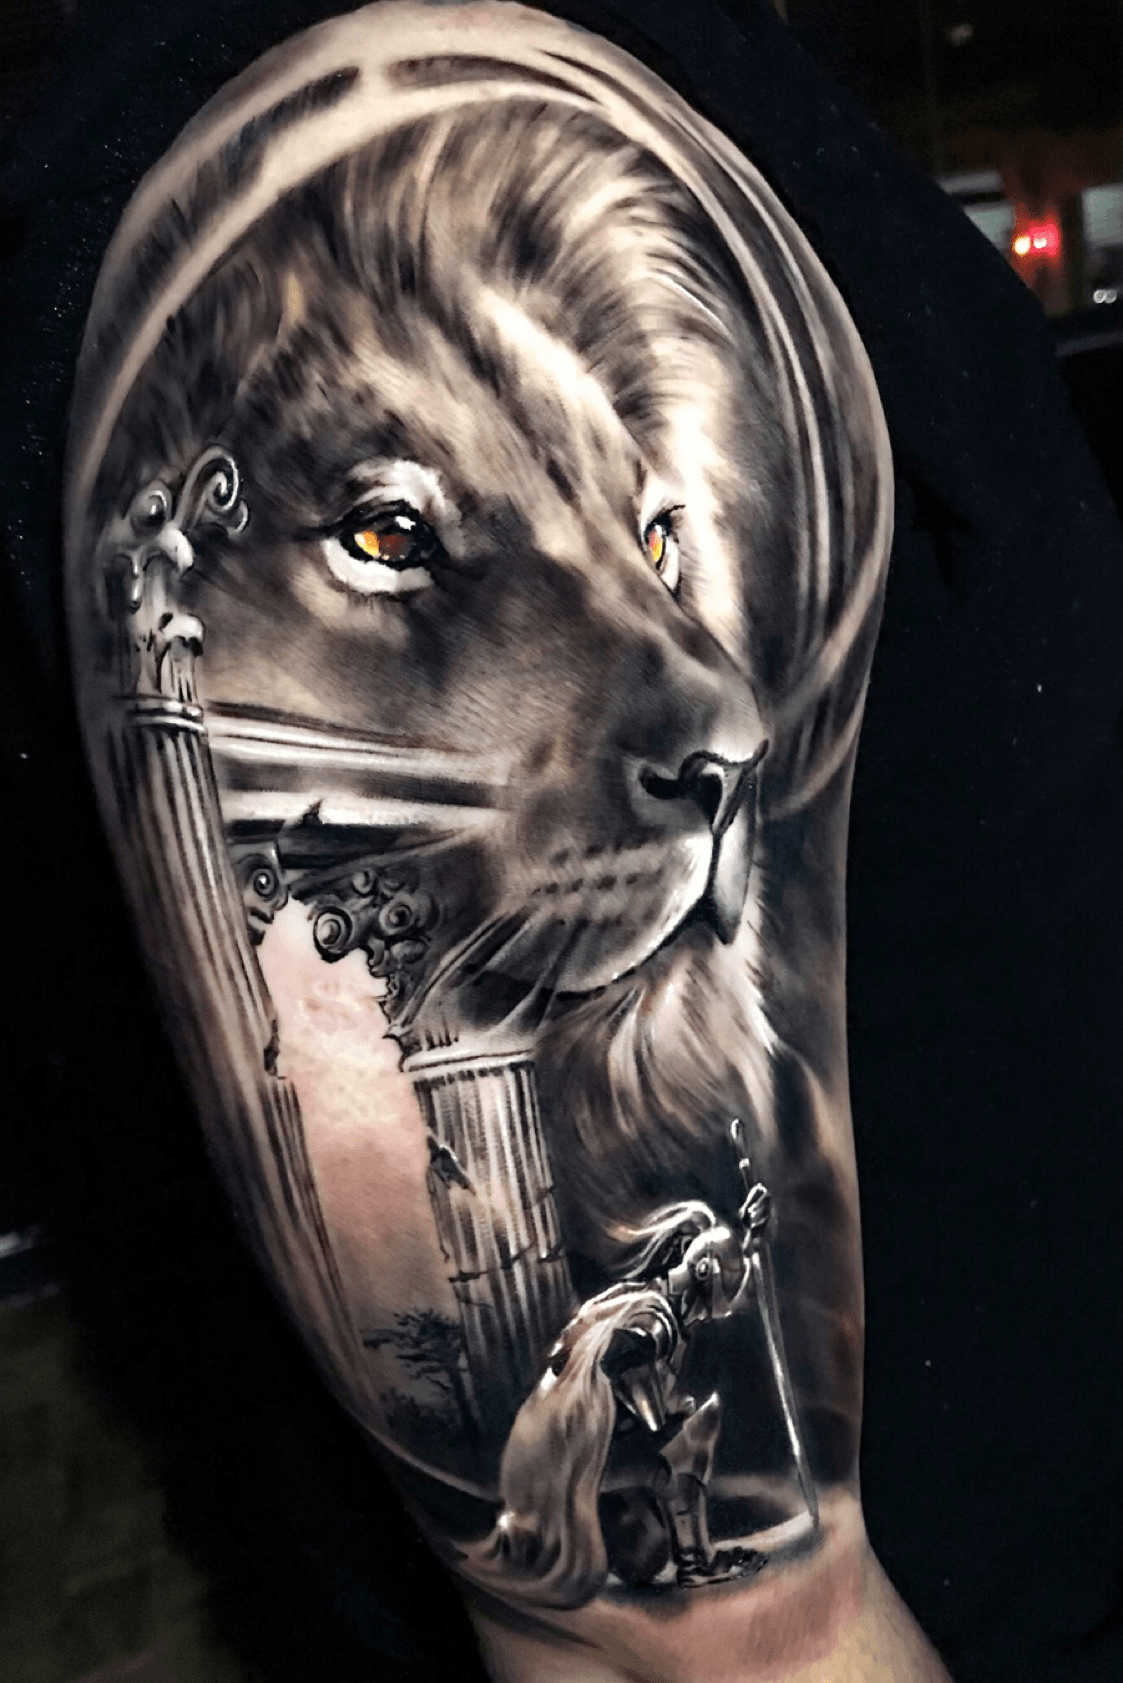 Tattoo uploaded by Pedro  Black  gray realism lion and warrior soldier  spartan pedromullertattoos  Tattoodo